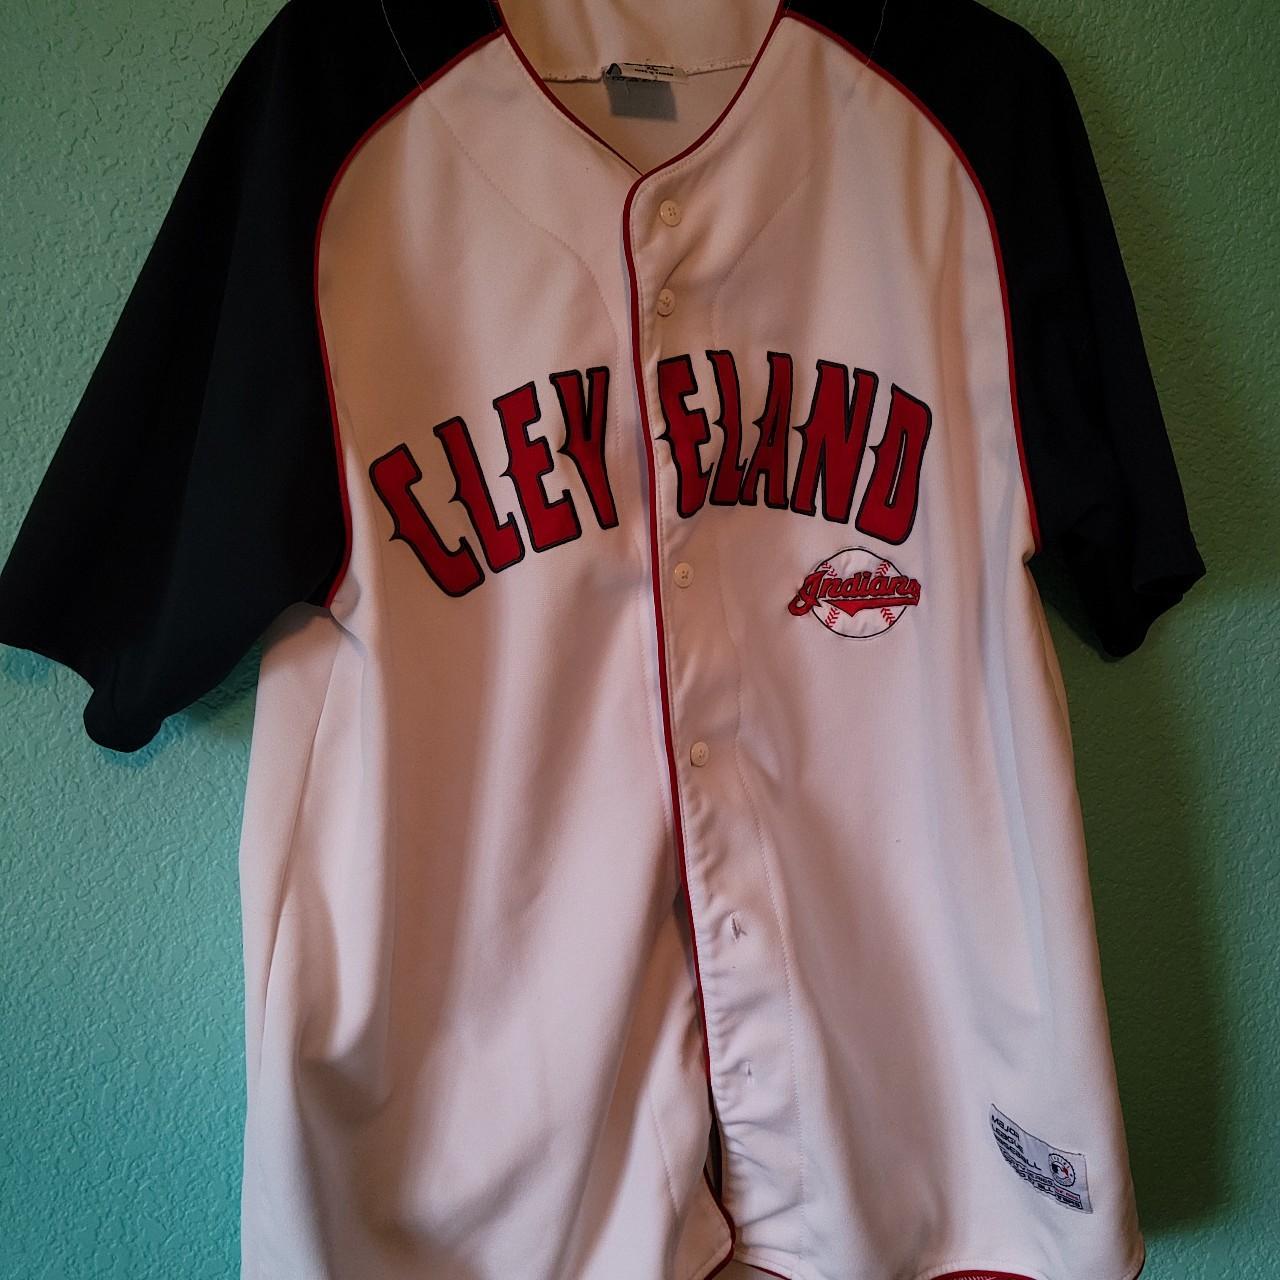 Cleveland Indians Blue Embroidered Baseball Jersey by Dynasty 